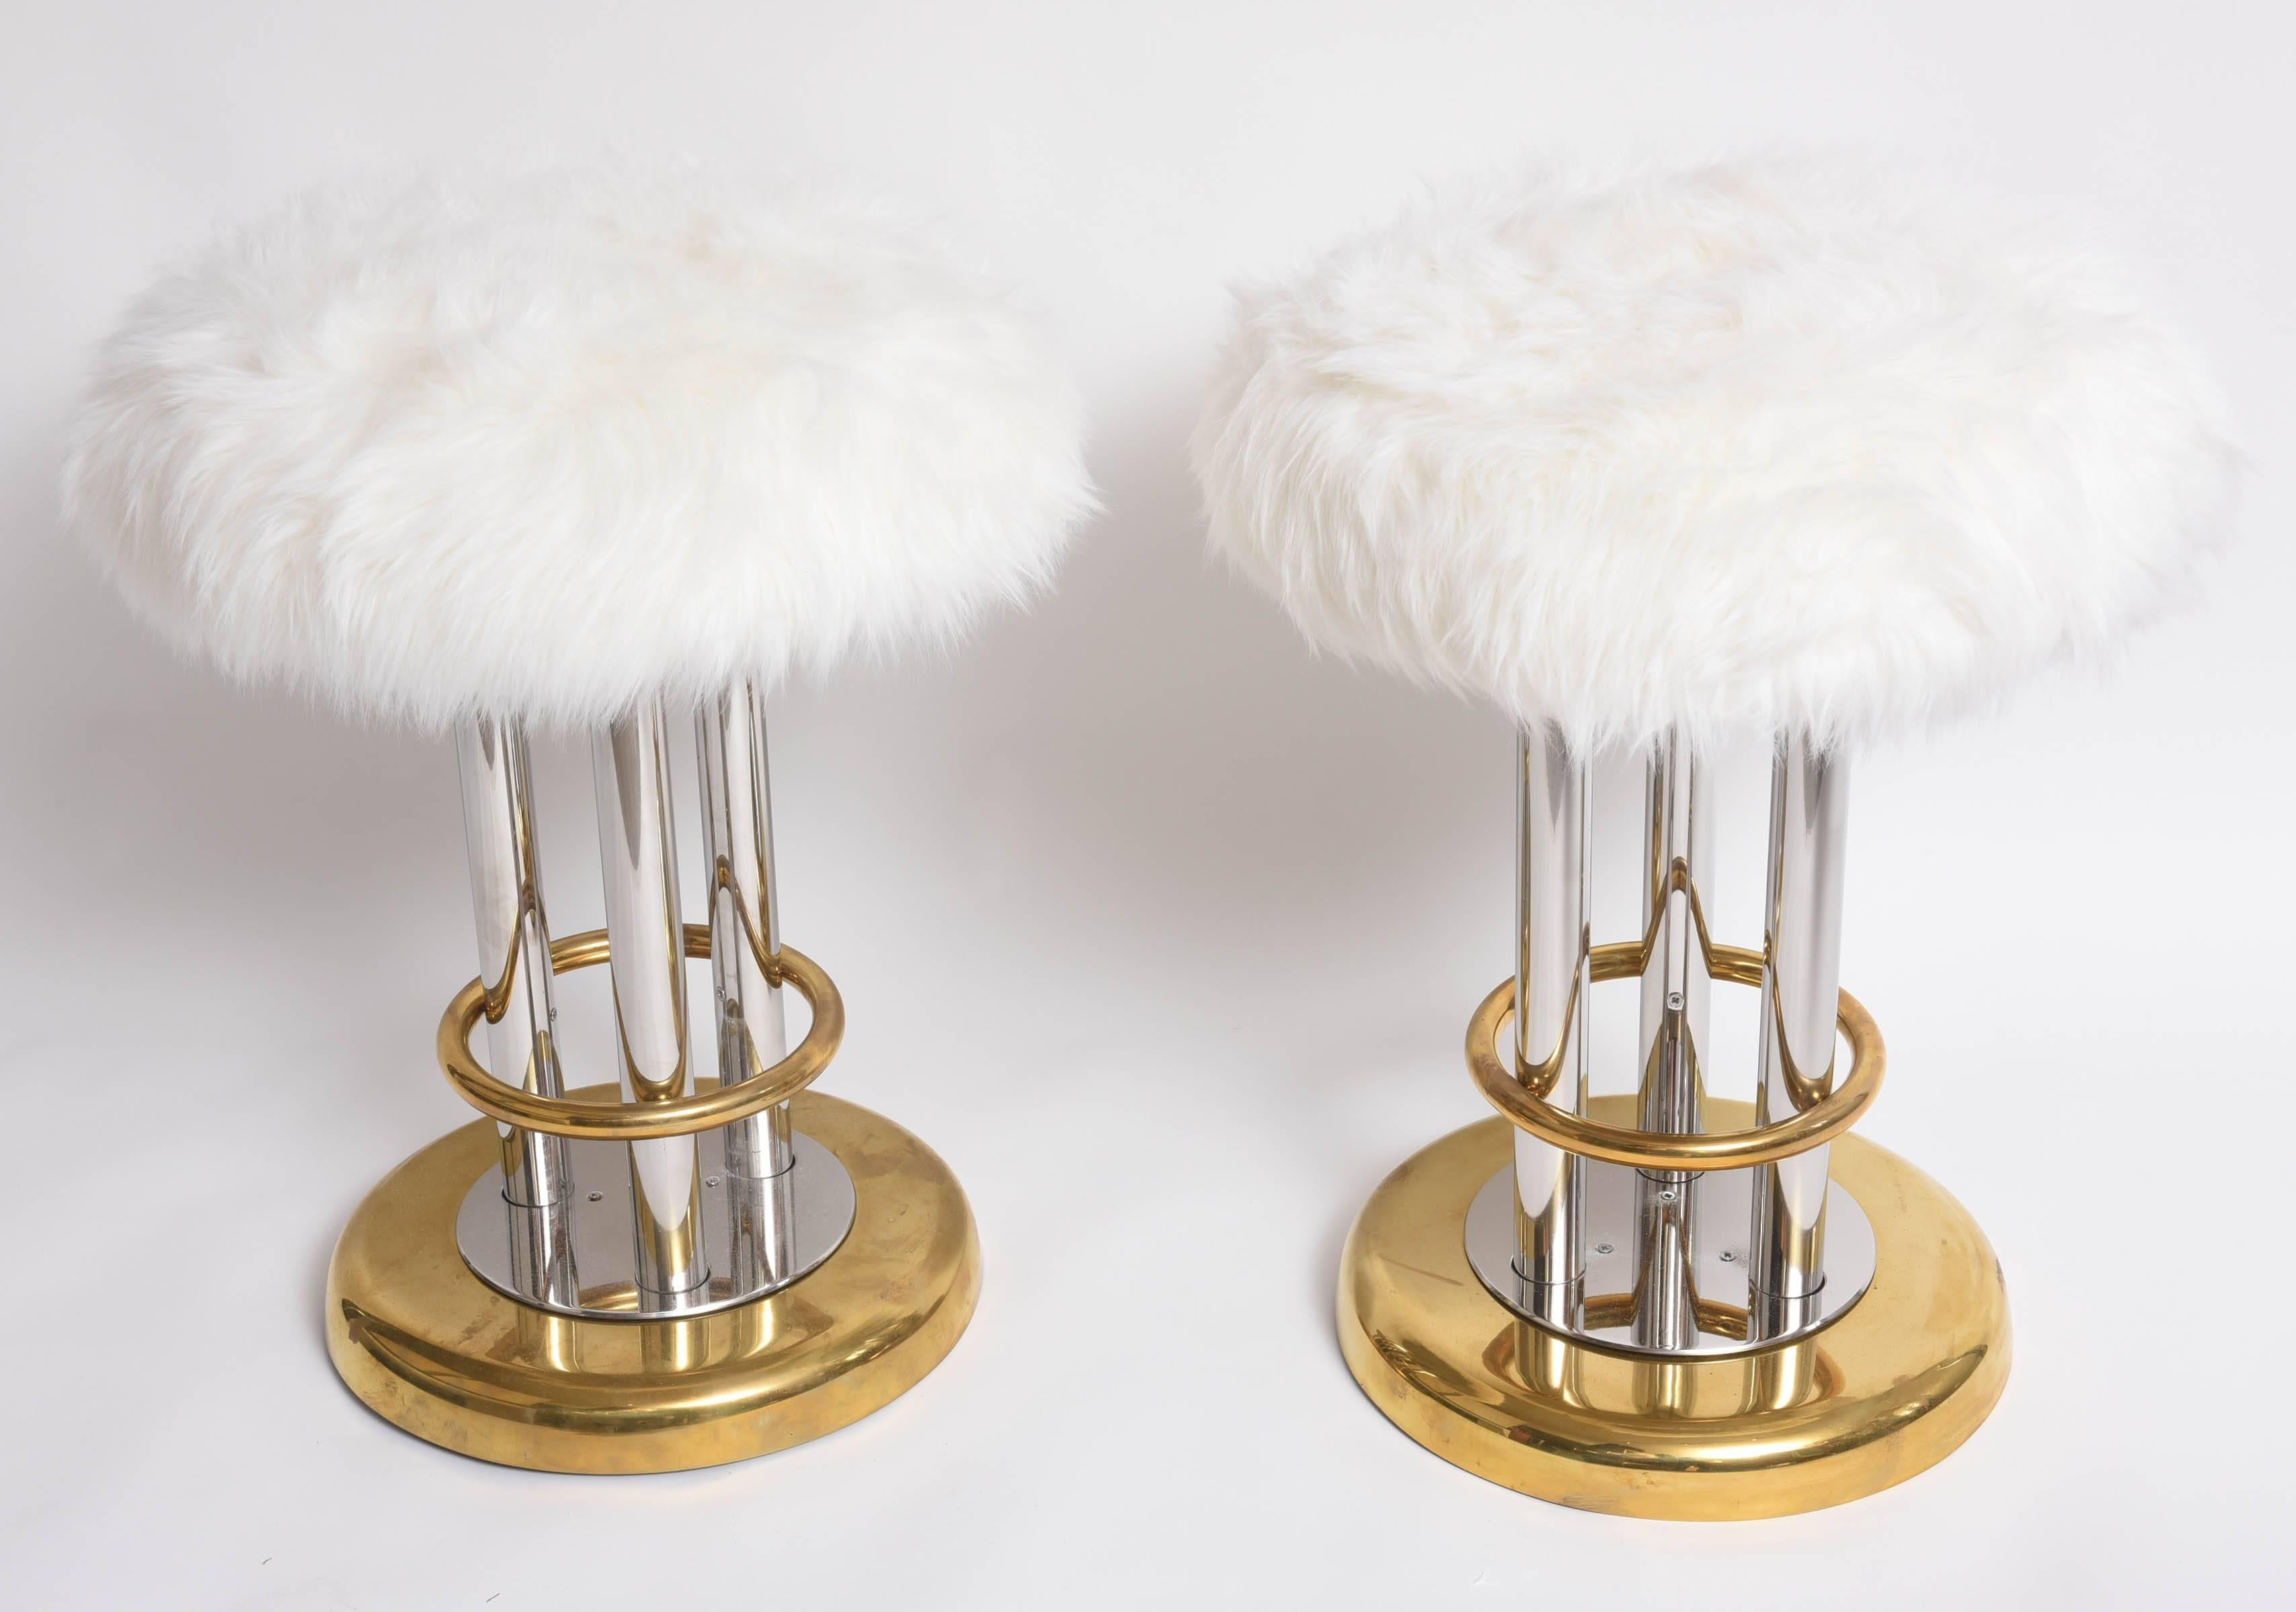 Mid-Century Modern American Decorative Brass or Chrome Furry Stools Pair  For Sale 4